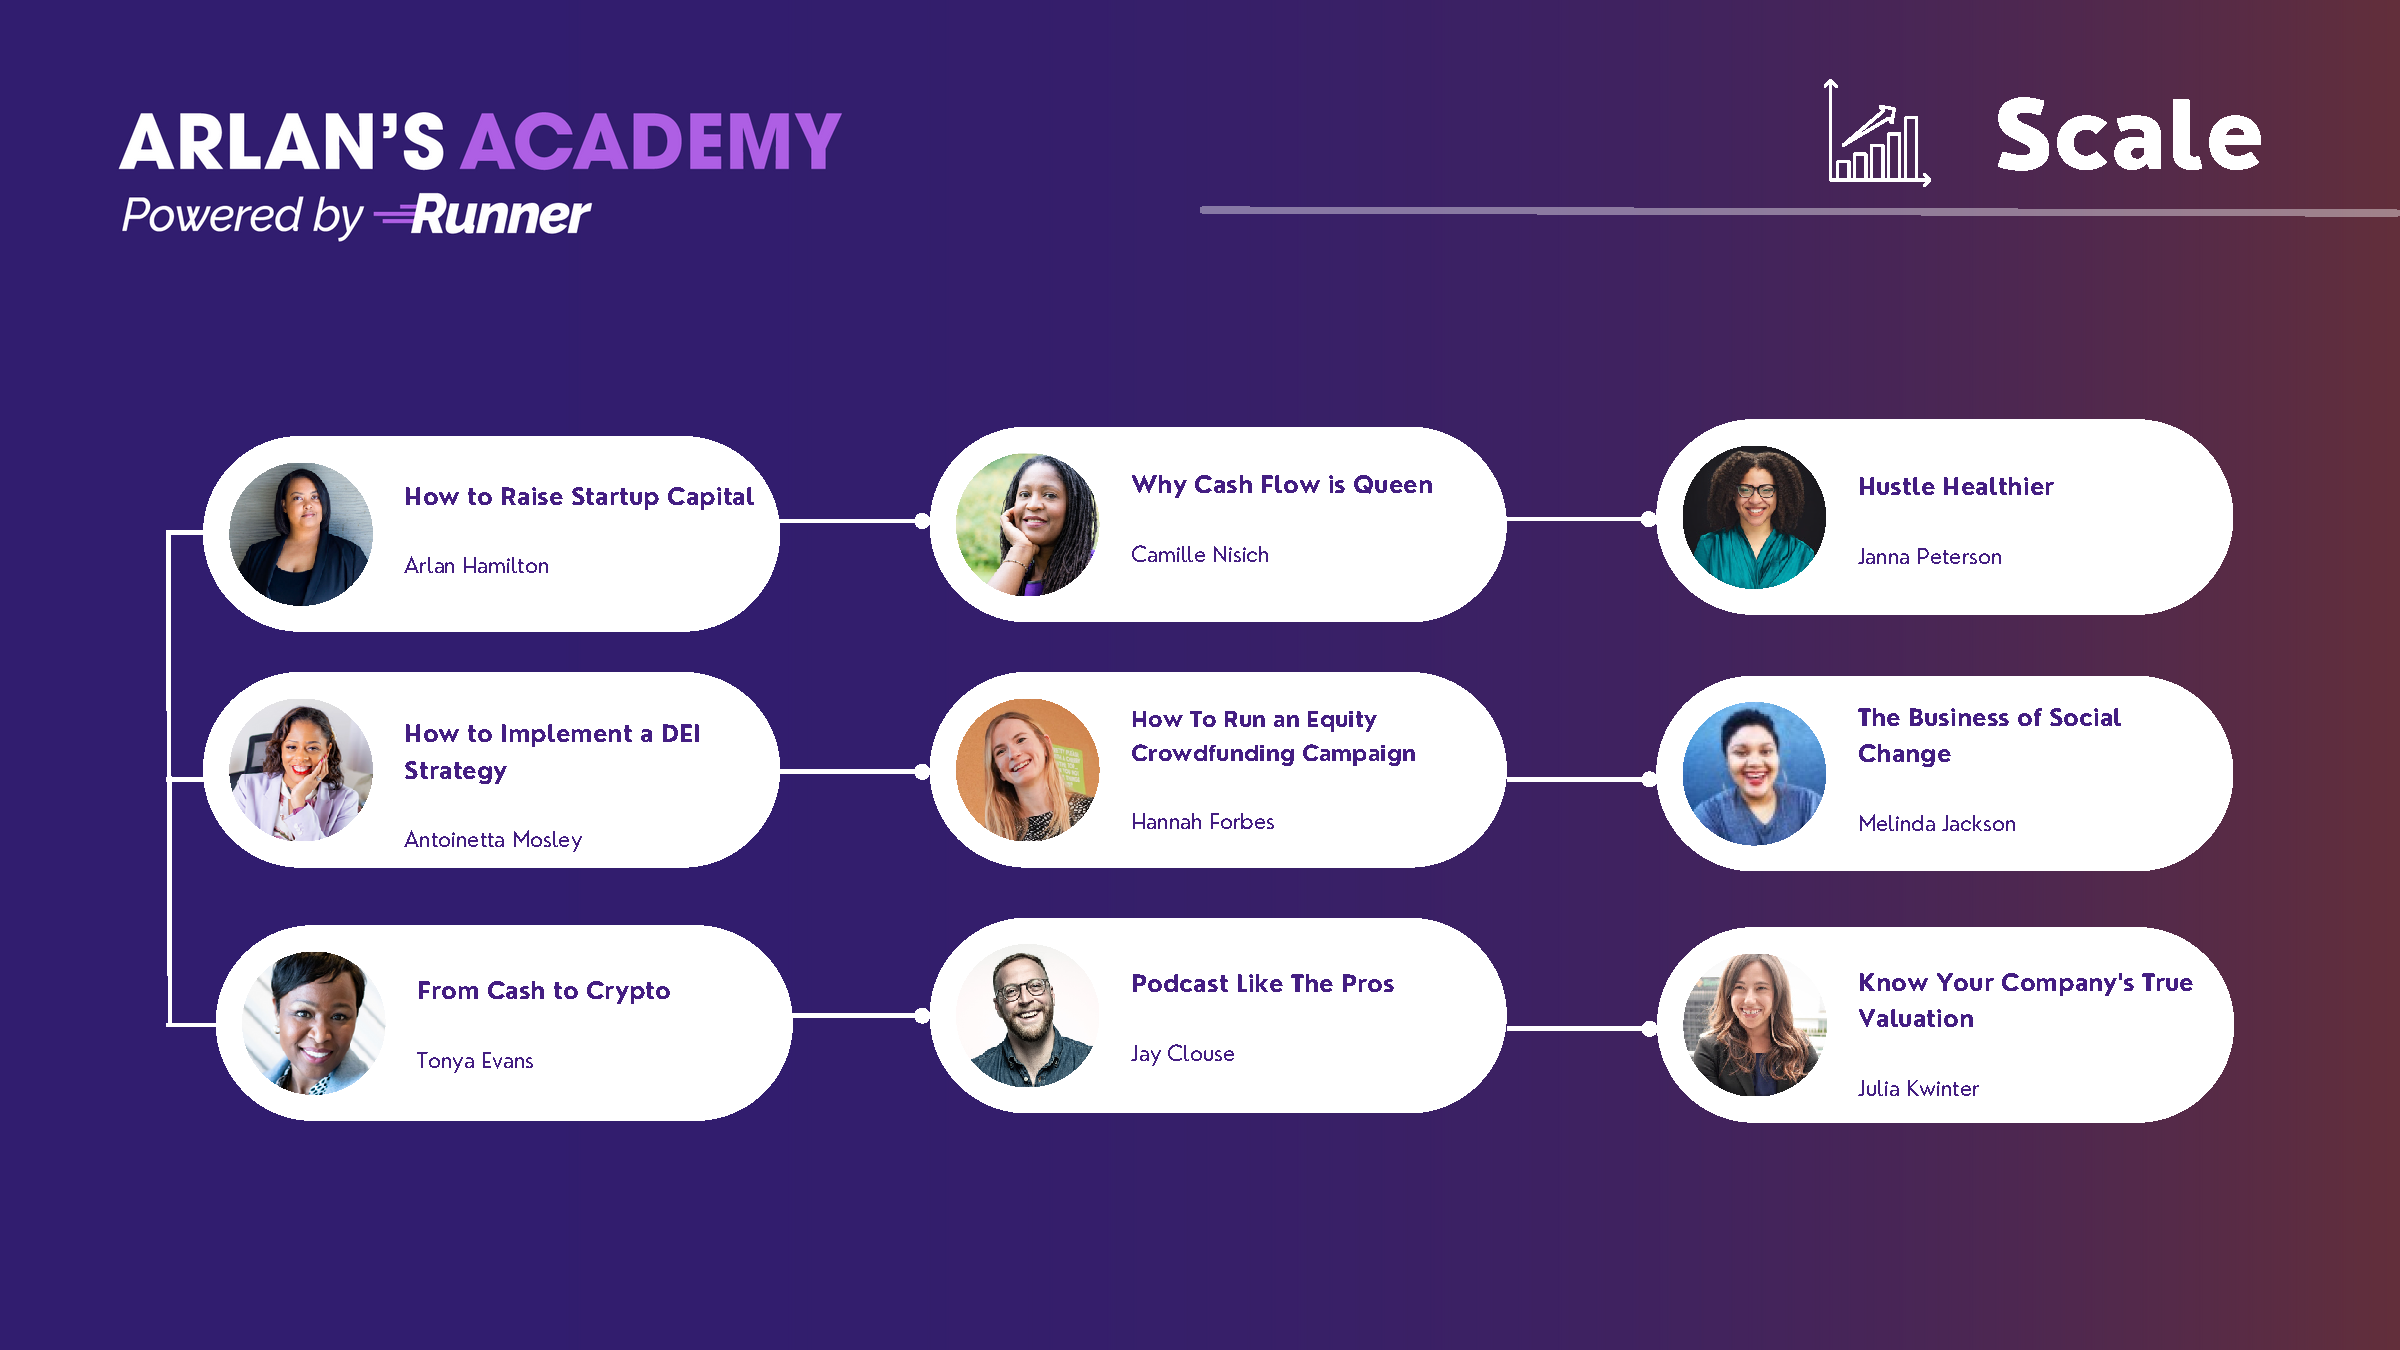 Nine courses are included in Arlan&#39;s Academy Track for Scaling. This image lists the nine instructors and their courses related to scaling.